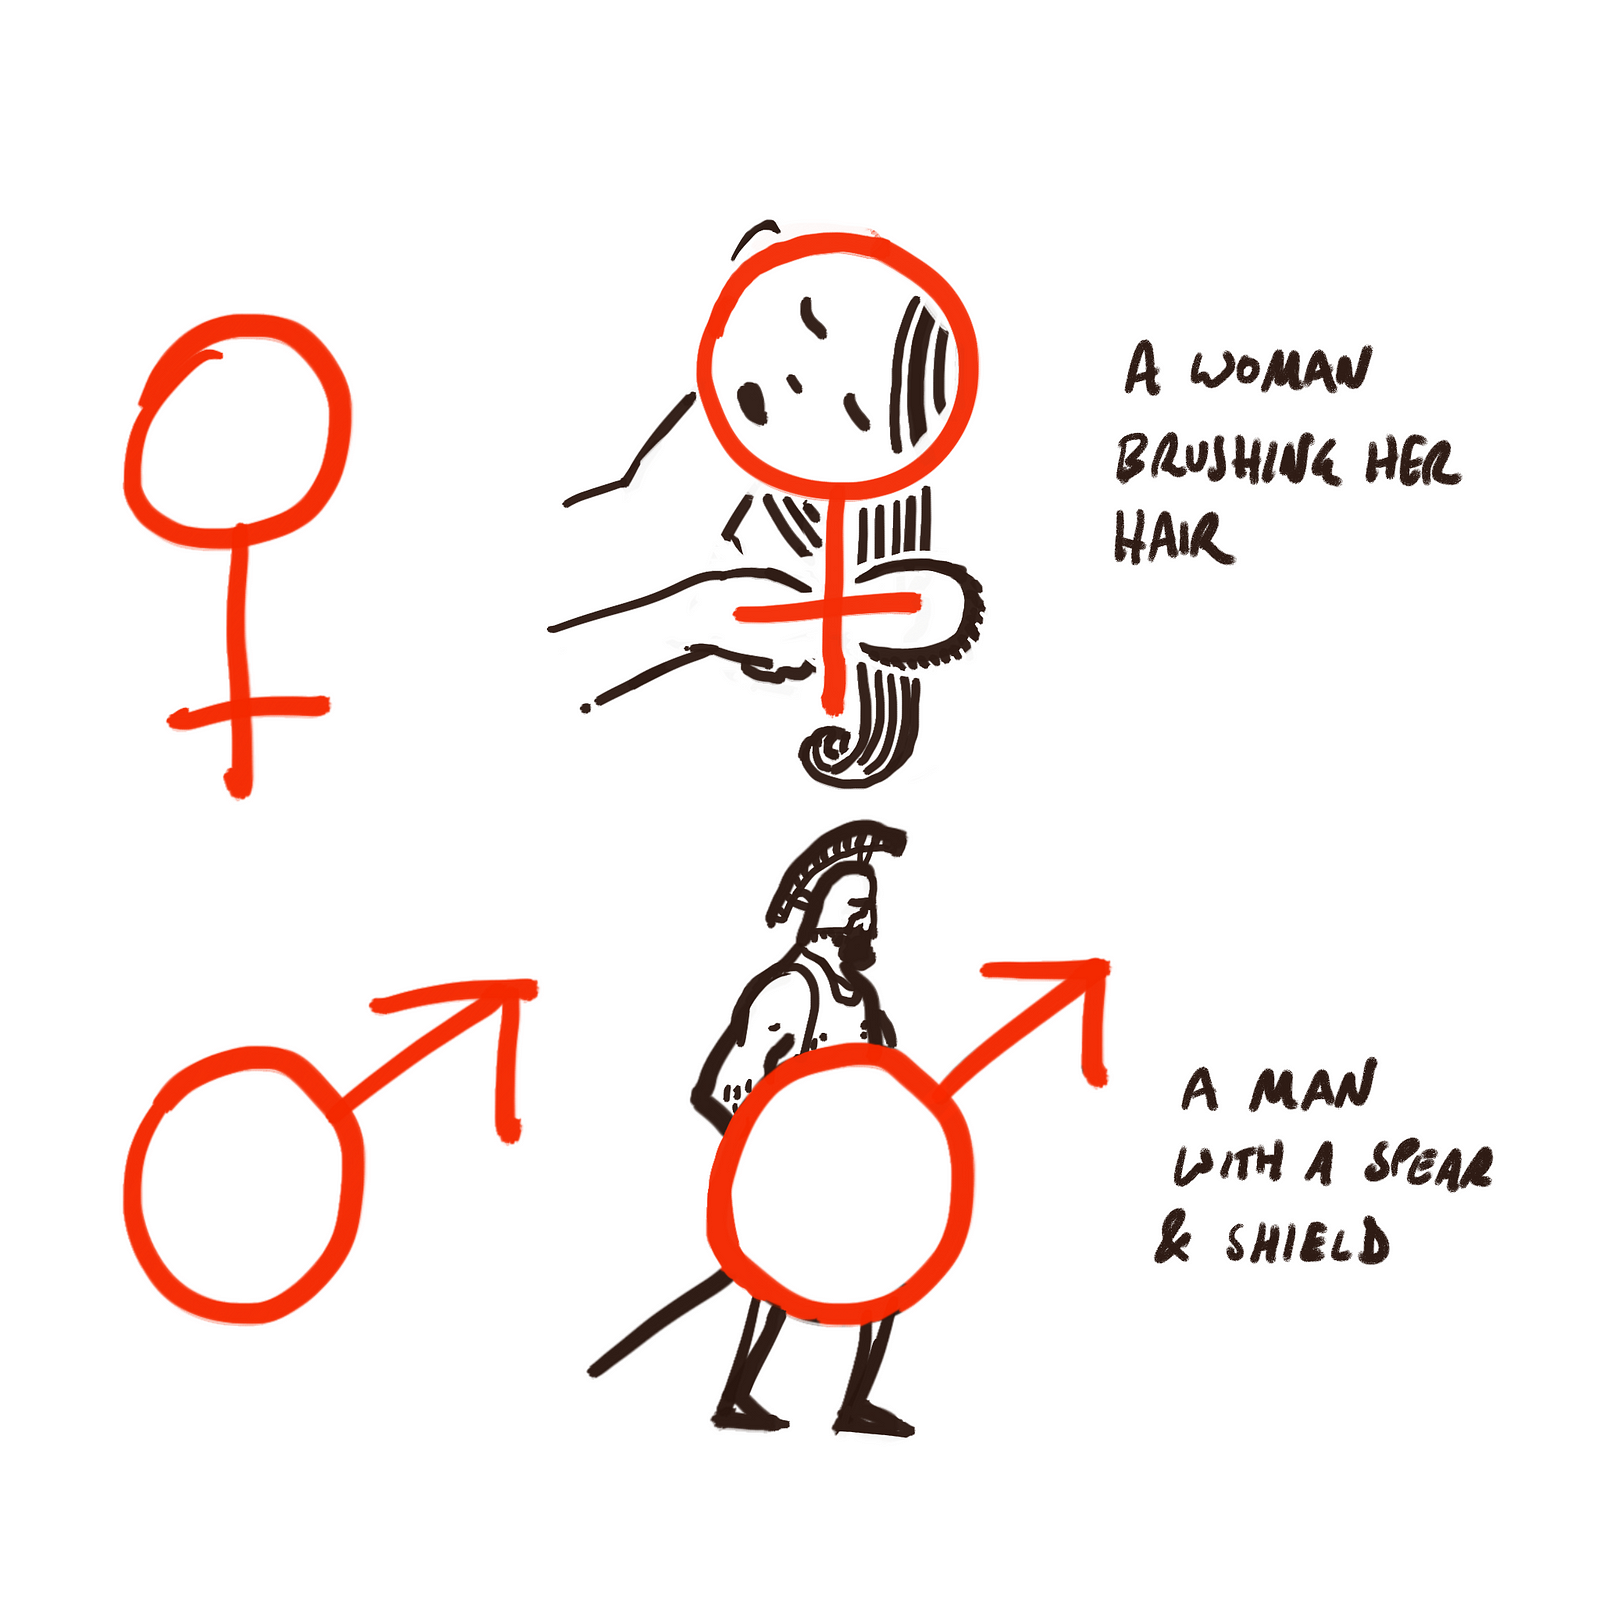 A Visual Mnemonic For Remembering The Male And Female Symbols